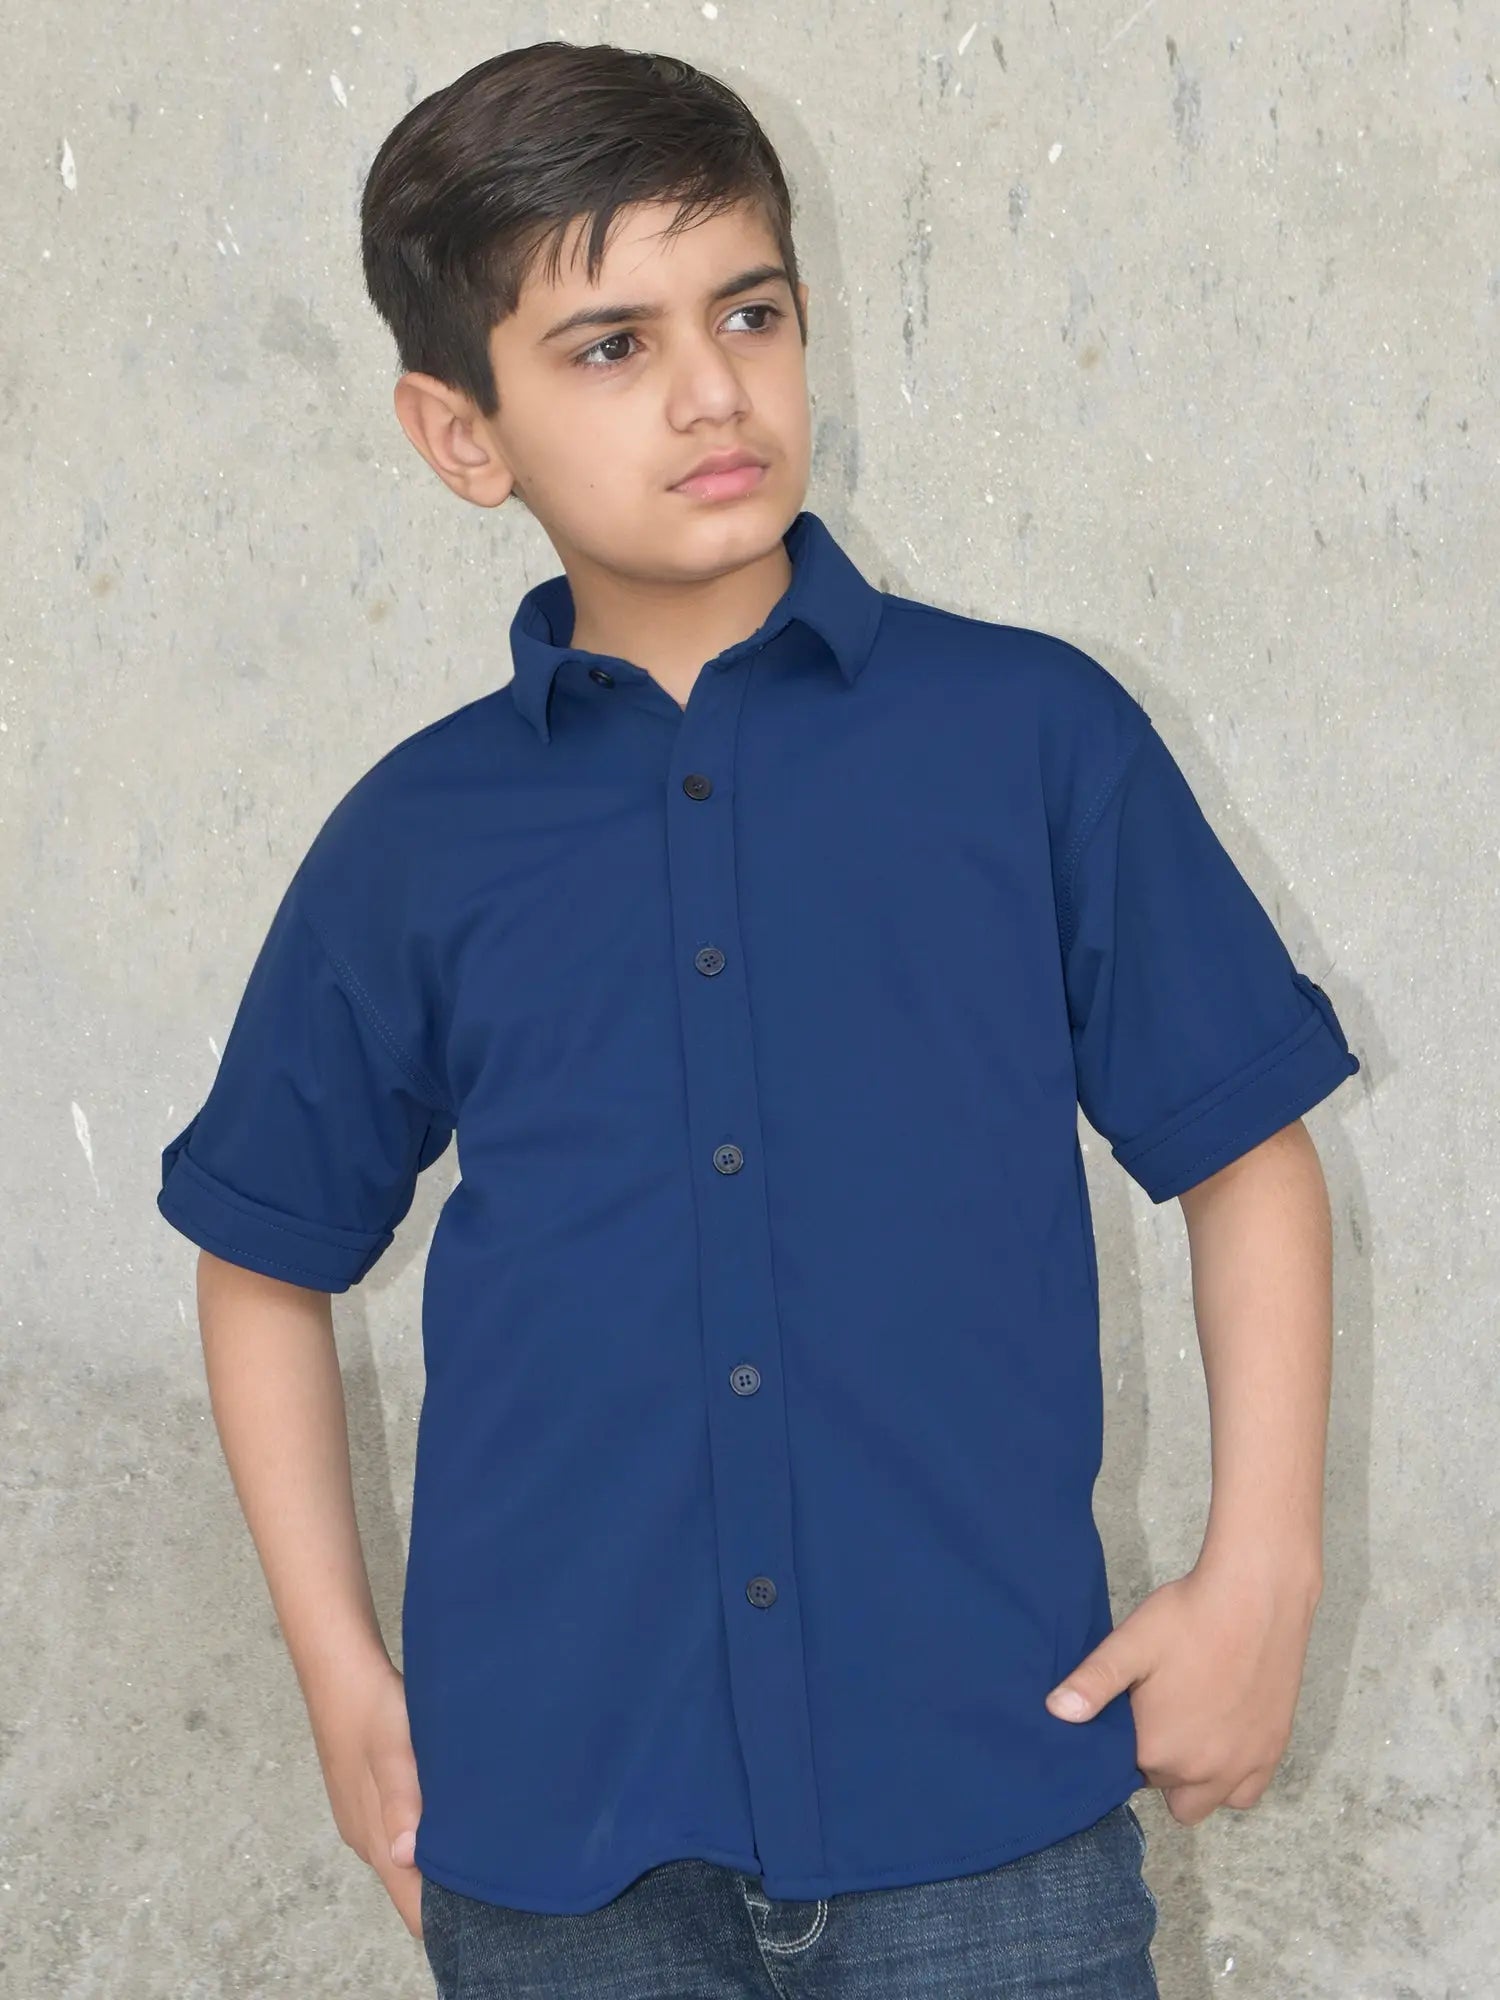 Louis Vicaci Super Stretchy Slim Fit Half Sleeve Lycra Casual Shirt For Kids-Dark Blue-BE40